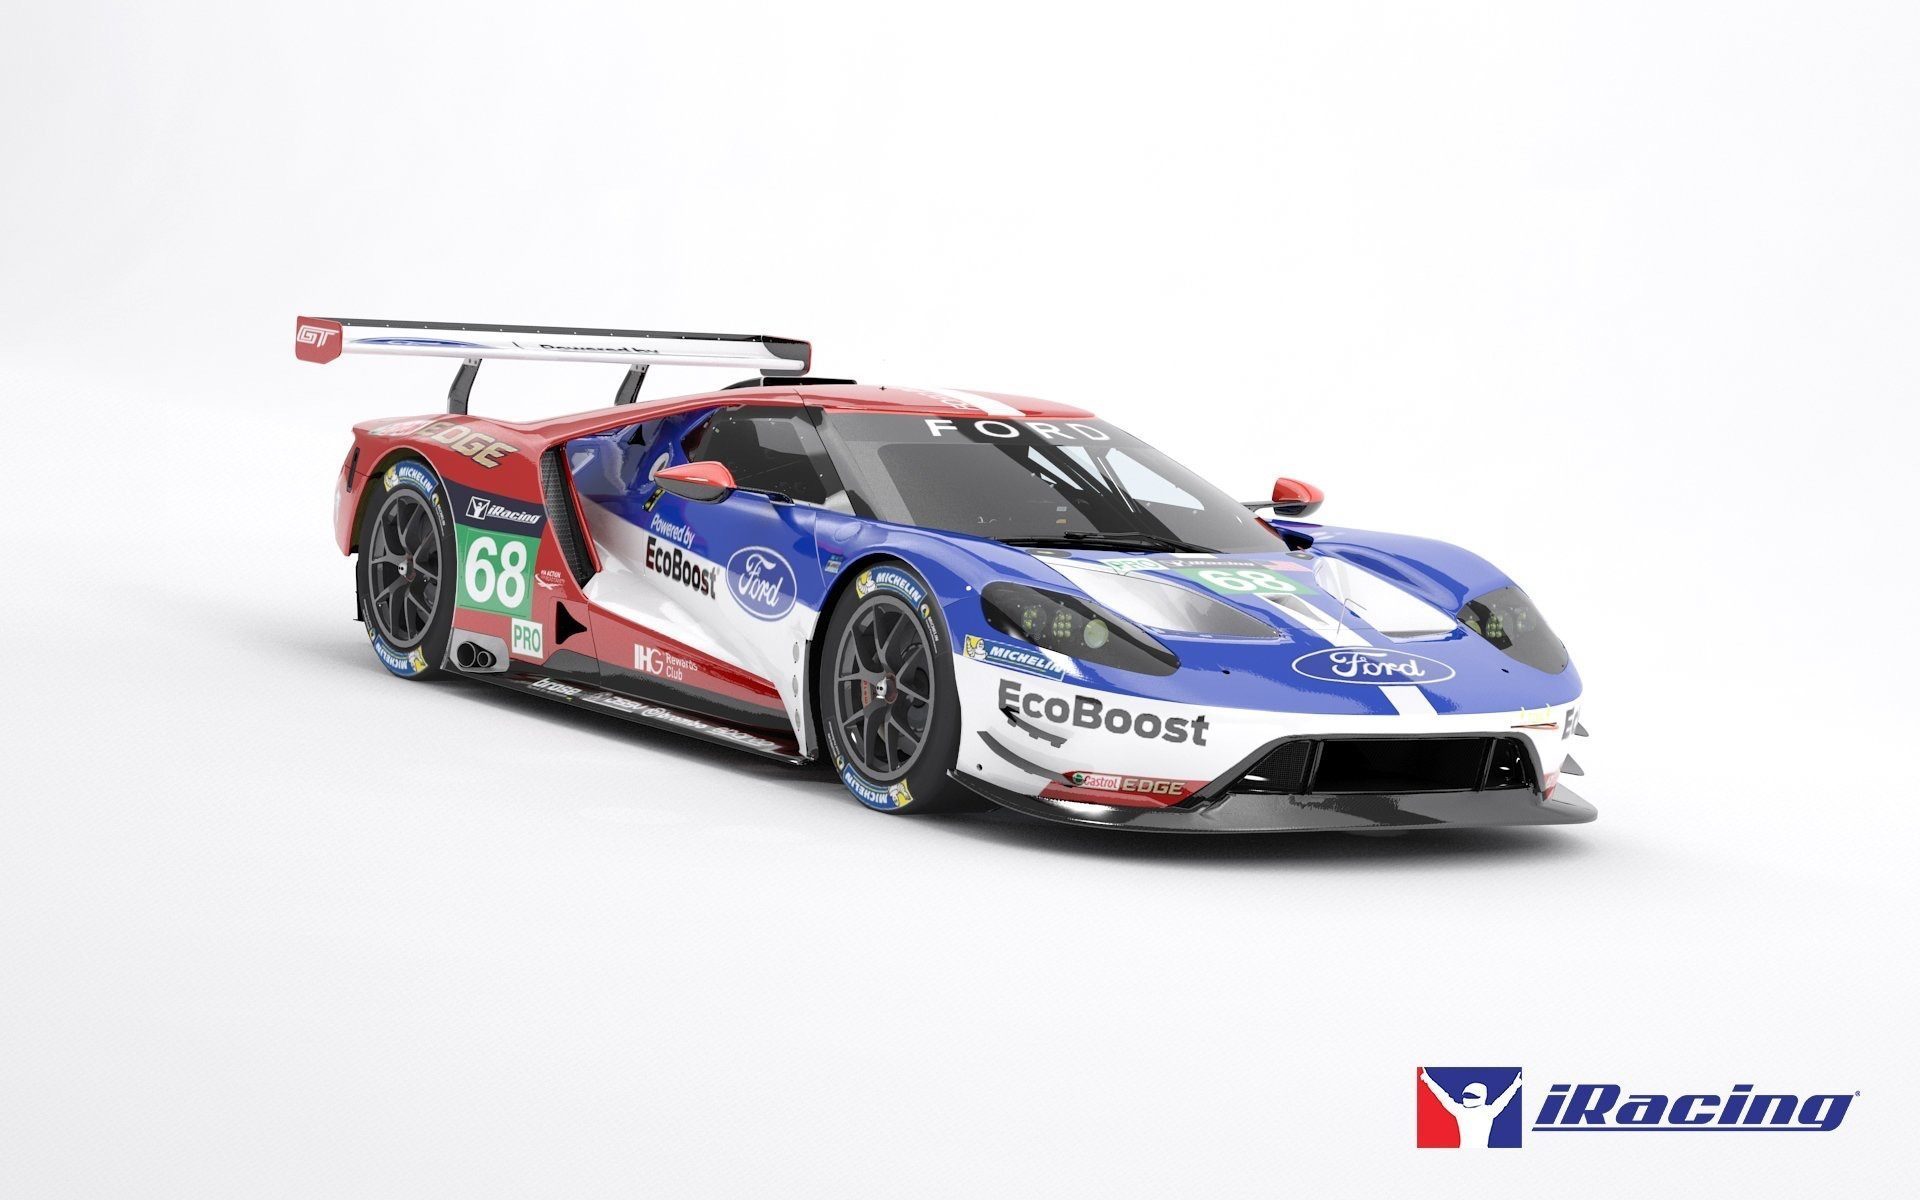 Ford GT LM Race Car Spec II  Ford gt, Cool sports cars, Indy cars